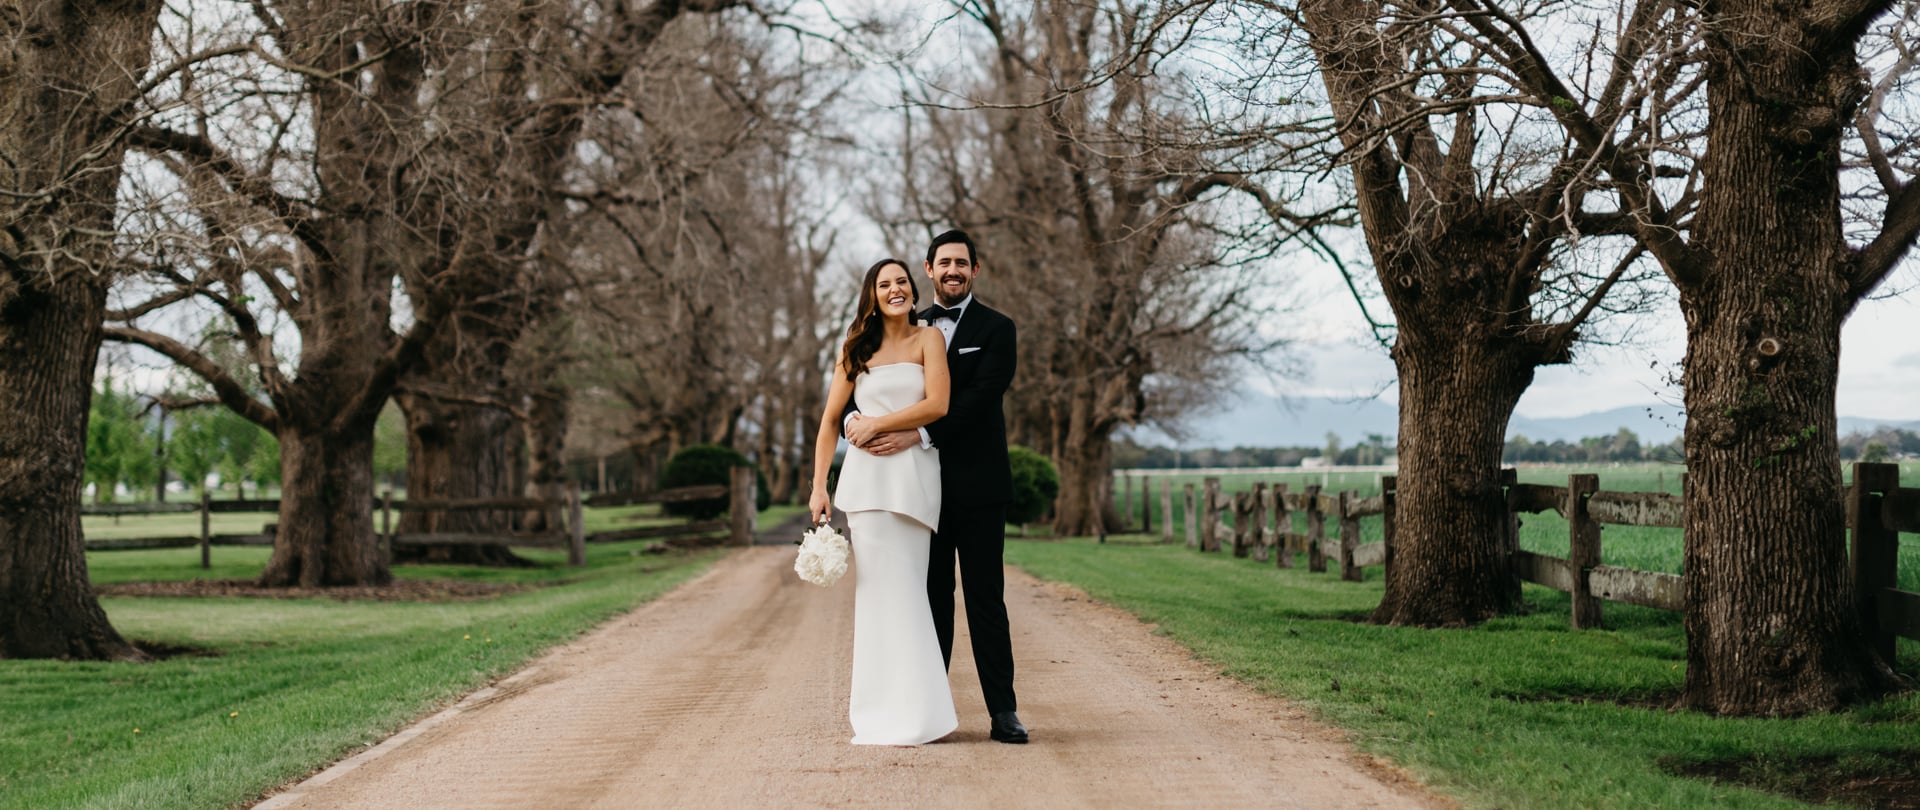 Alice & James Wedding Video Filmed at Berry, New South Wales